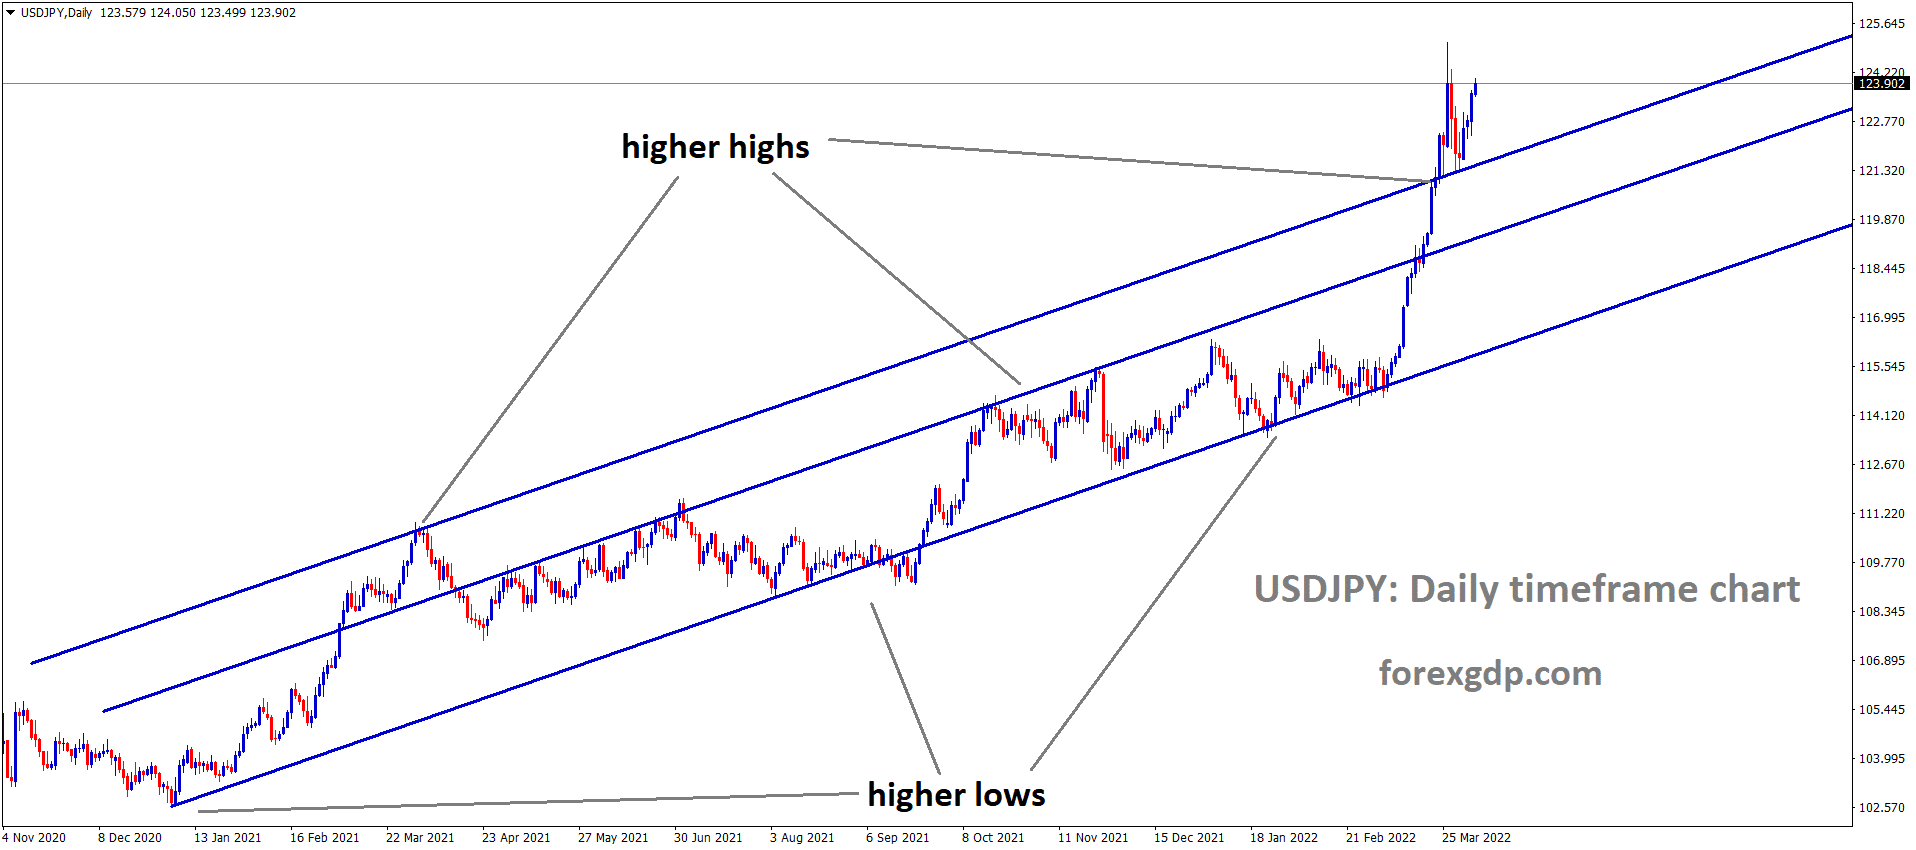 USDJPY Daily Time Frame Market is moving in an Ascending channel and Market has rebounded from the higher low area of the Extended Ascending channel line.